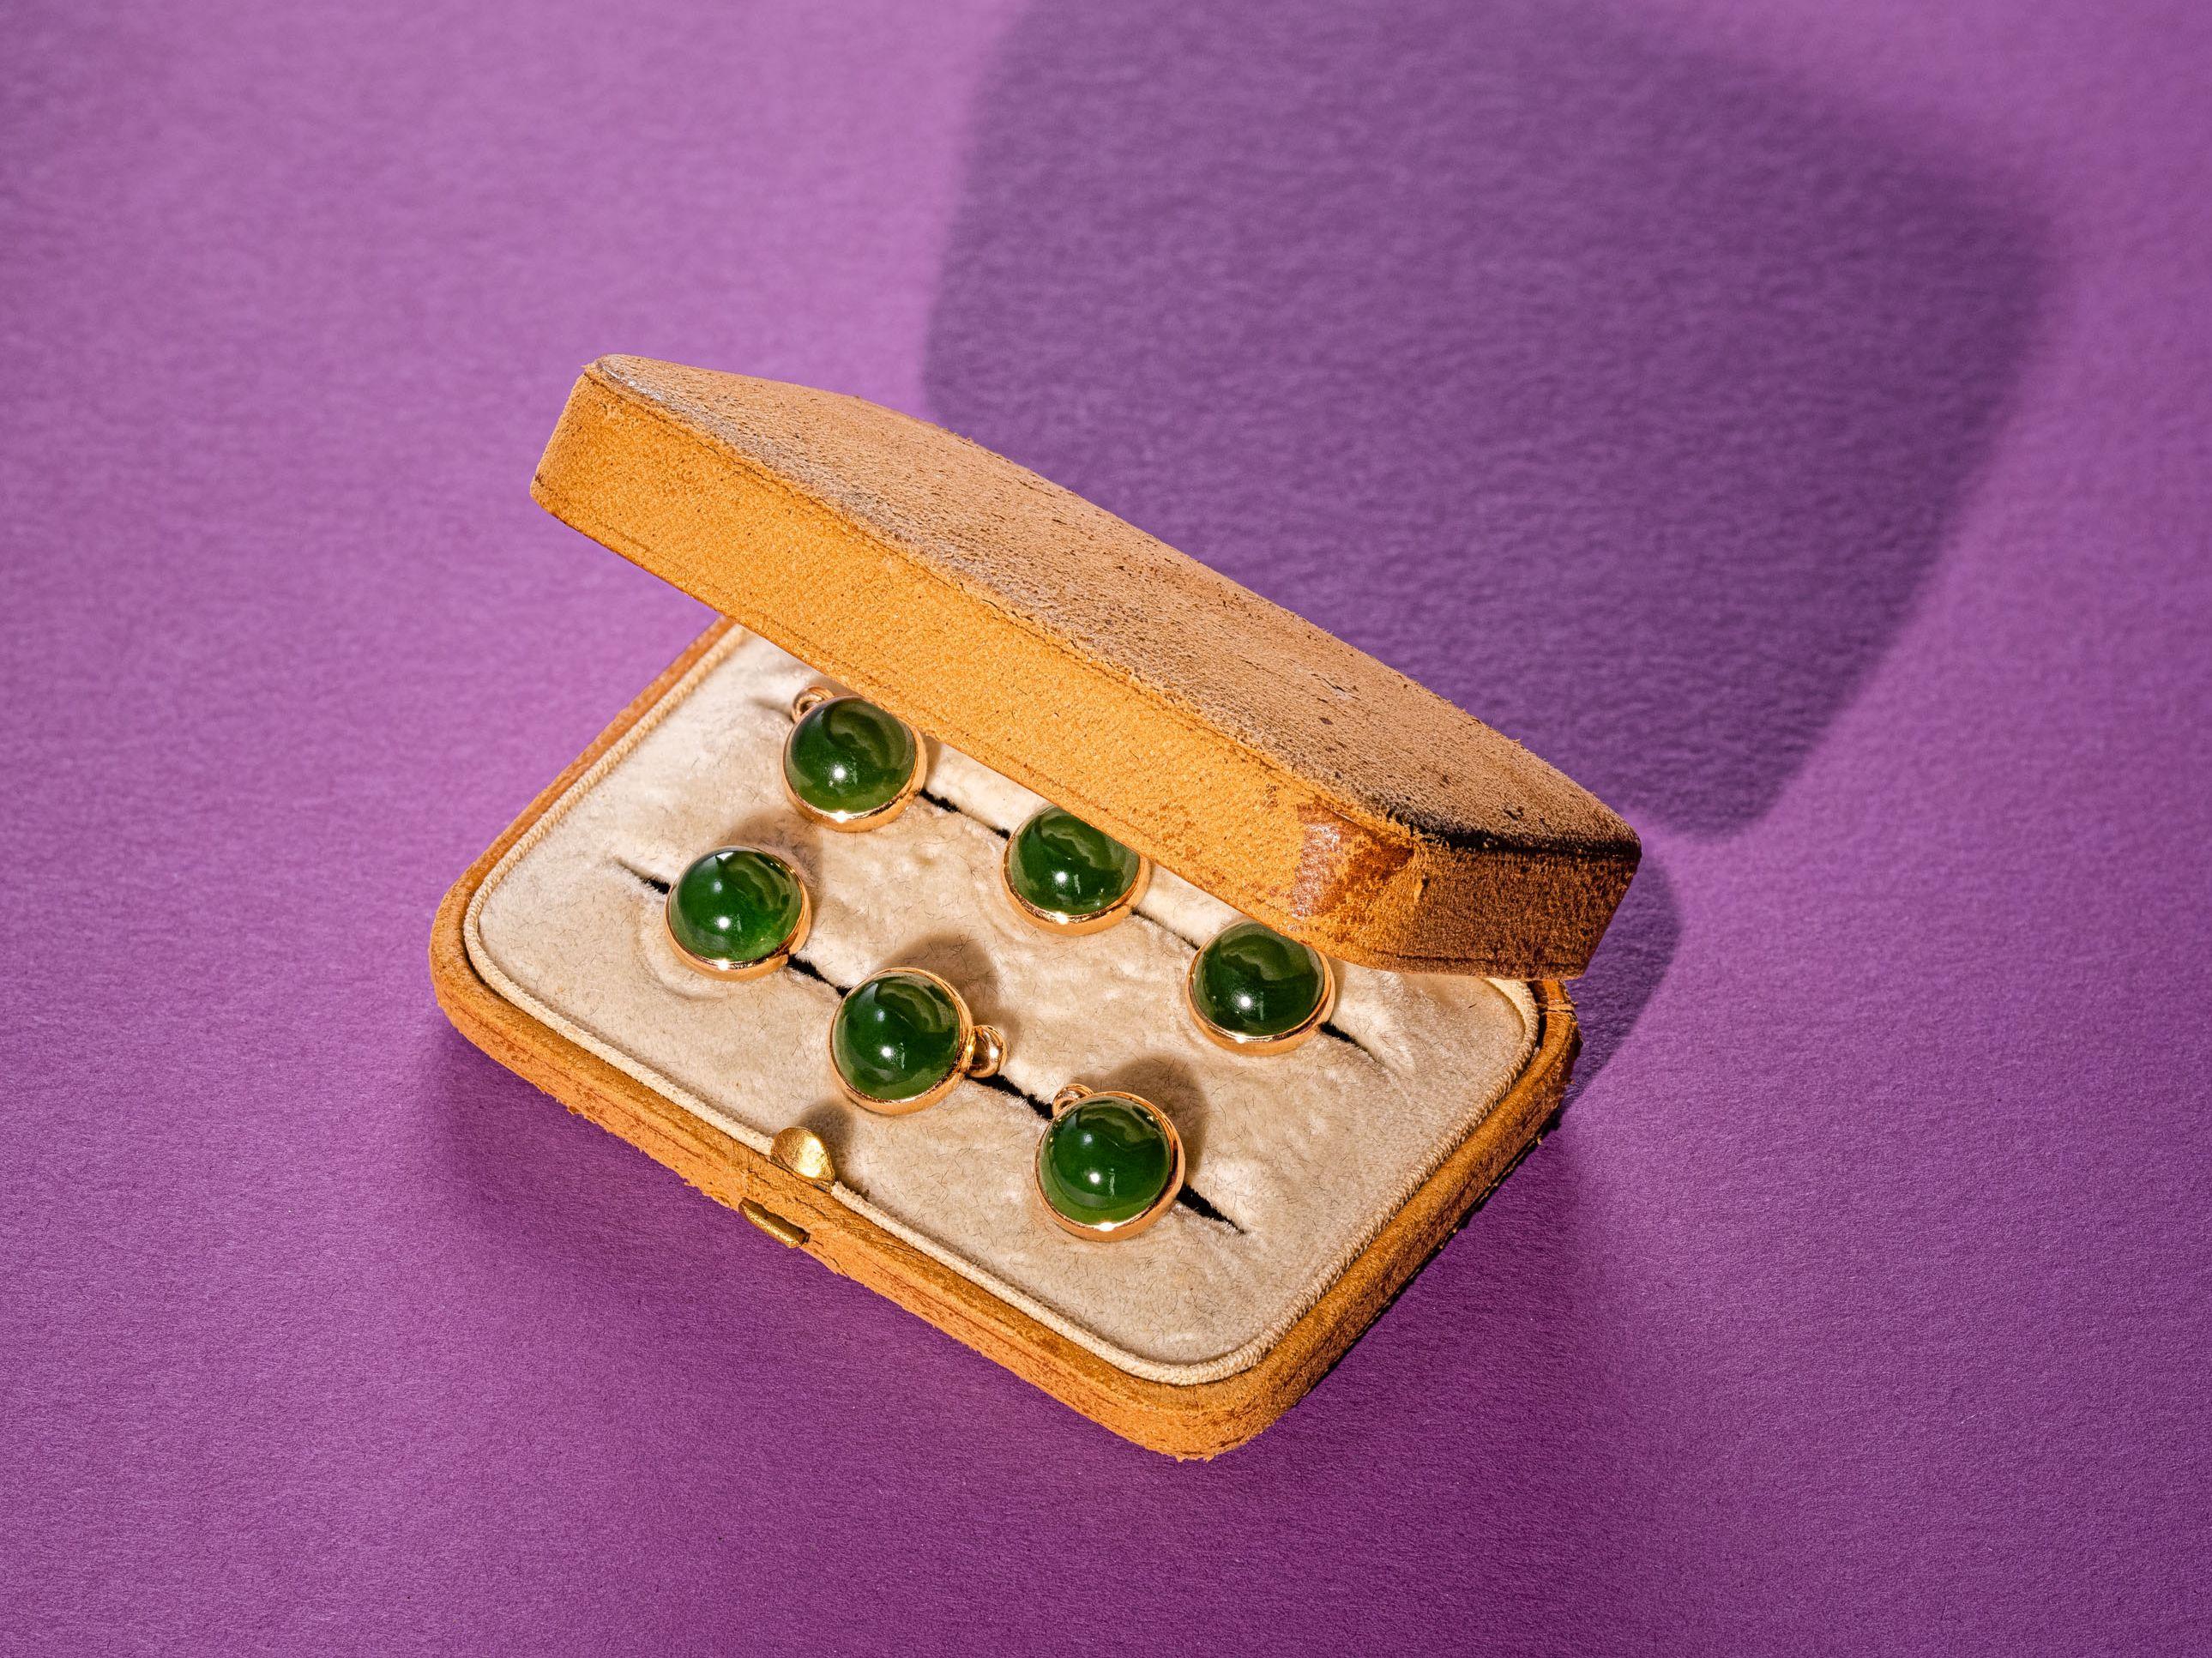 Set of 6 elegant dress buttons, made of gold and jade cabochons.
Early 20th Century.
Perfect for the distinguished gentleman, who likes to combine a green velvet dinnerjackett with these elegant jade buttons!
Tiffany Box going with it!